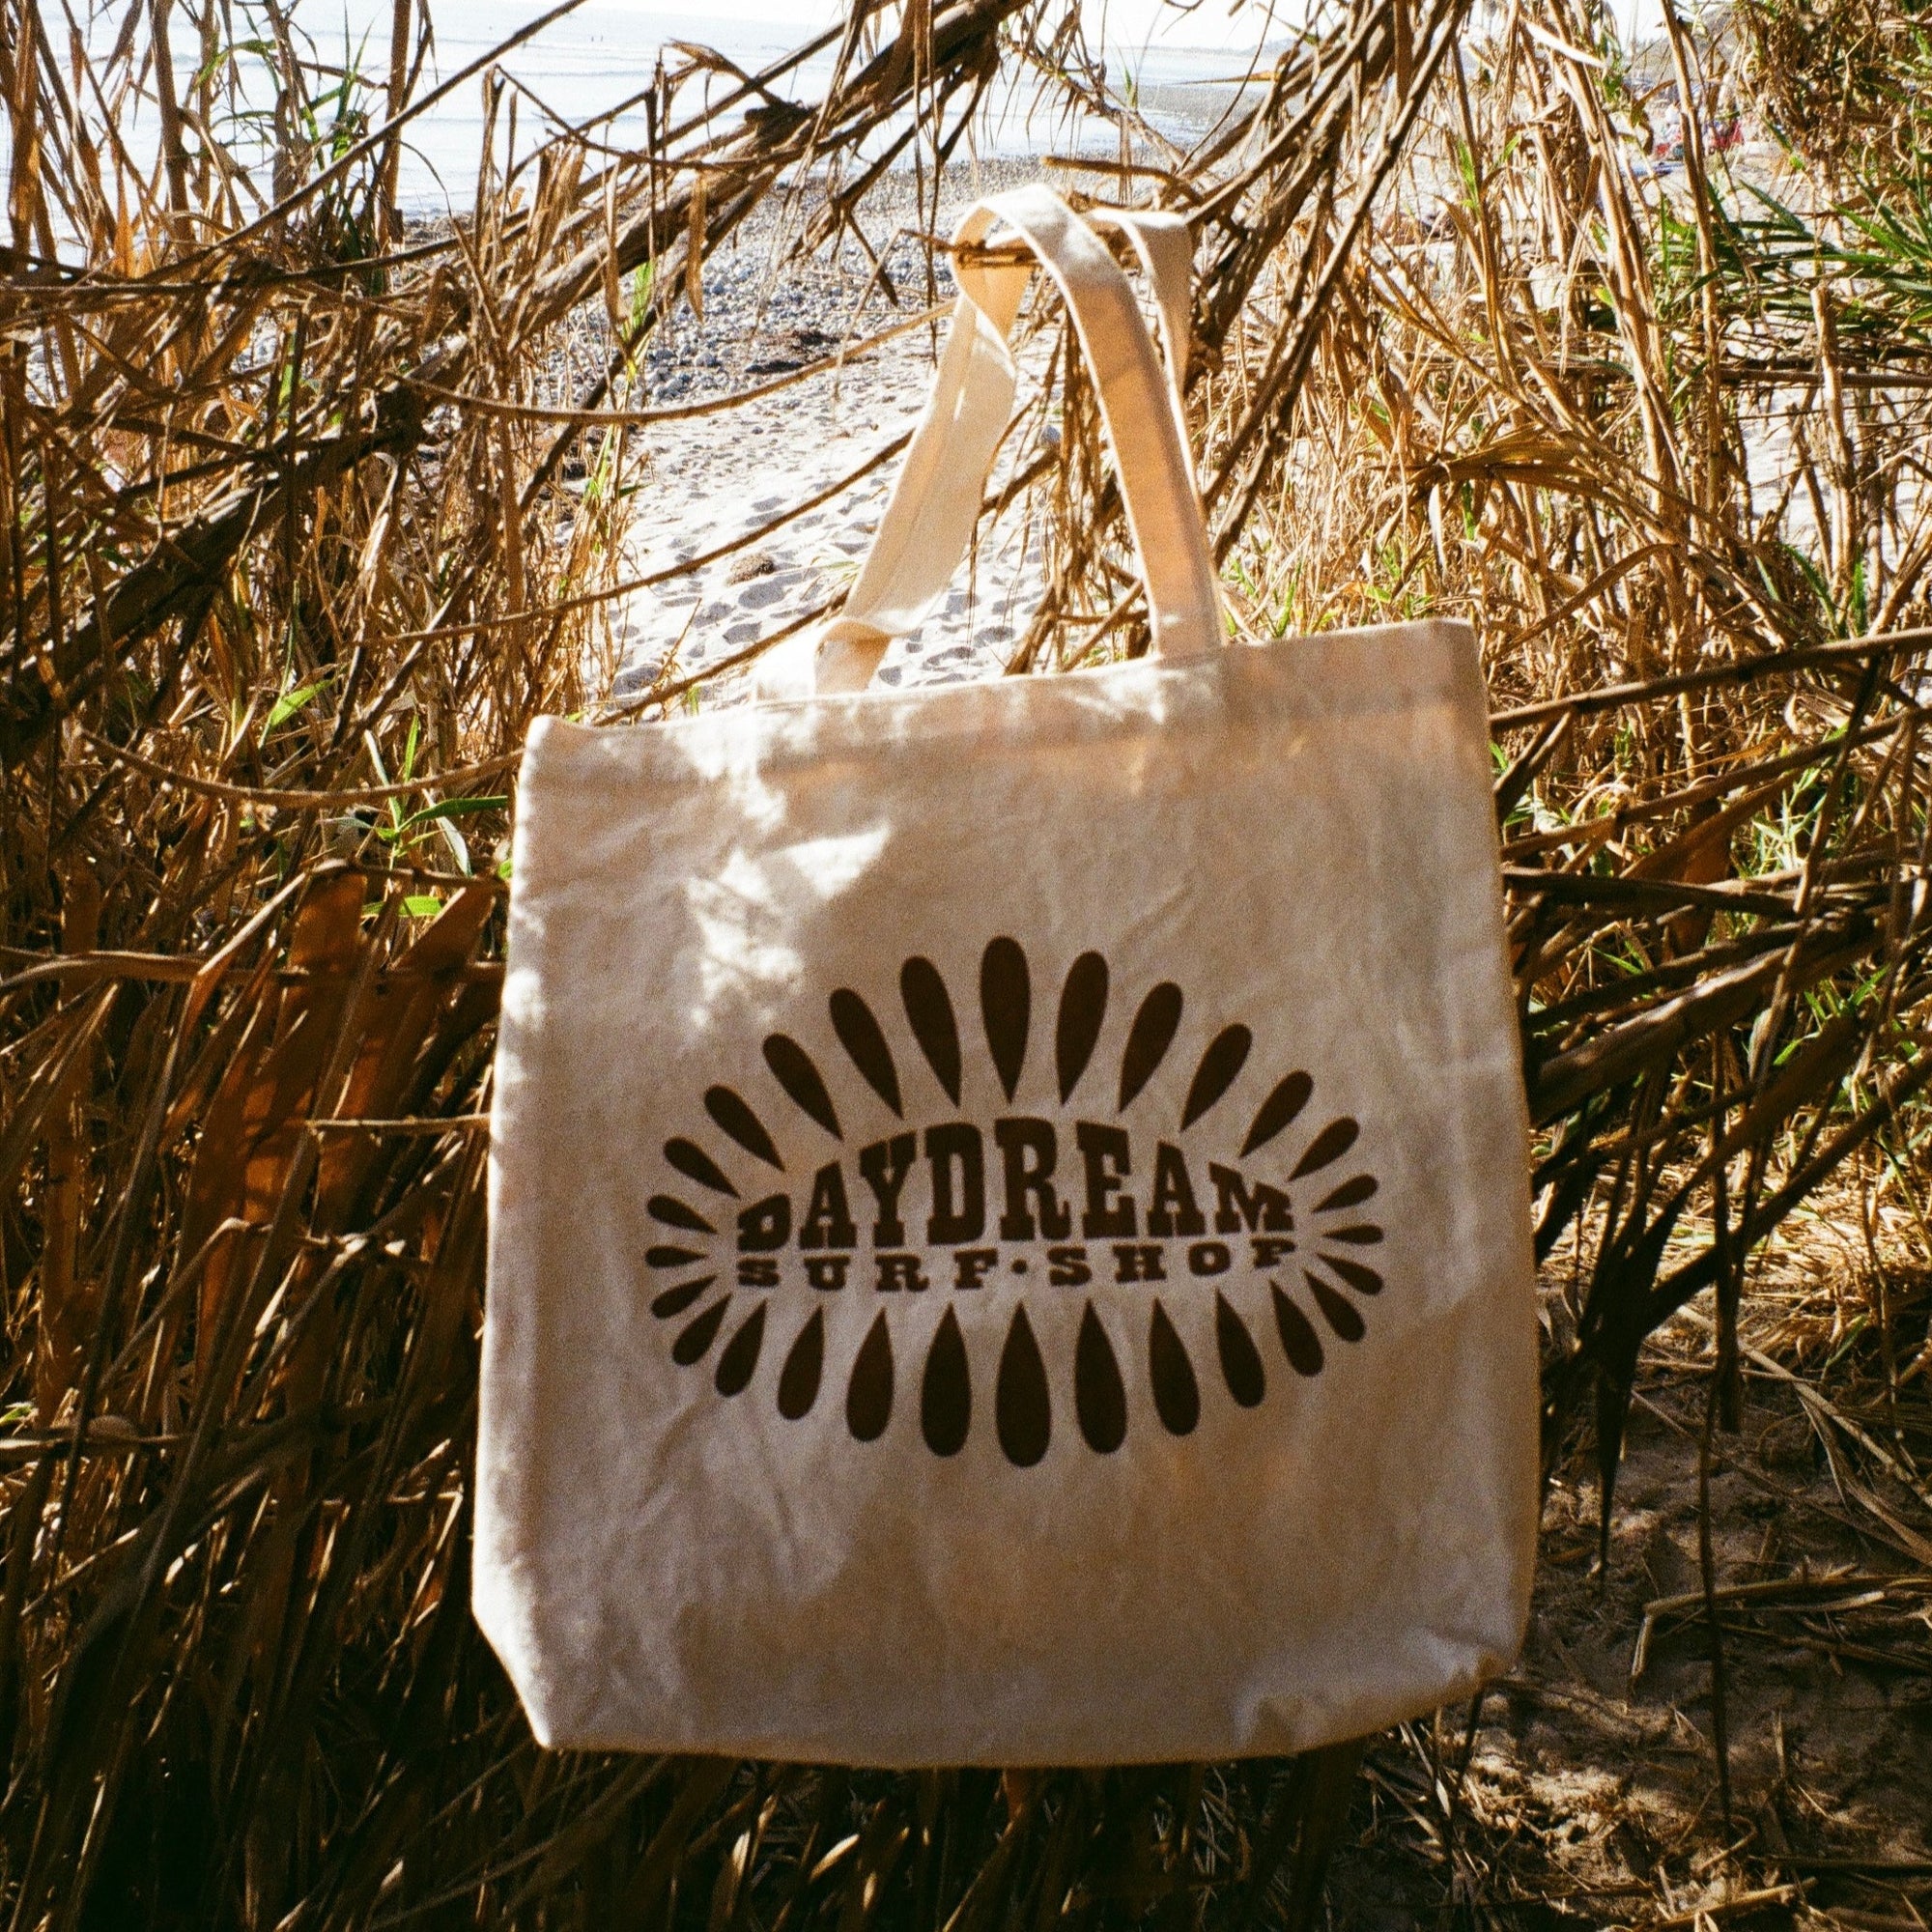 Daydream Bloom Tote